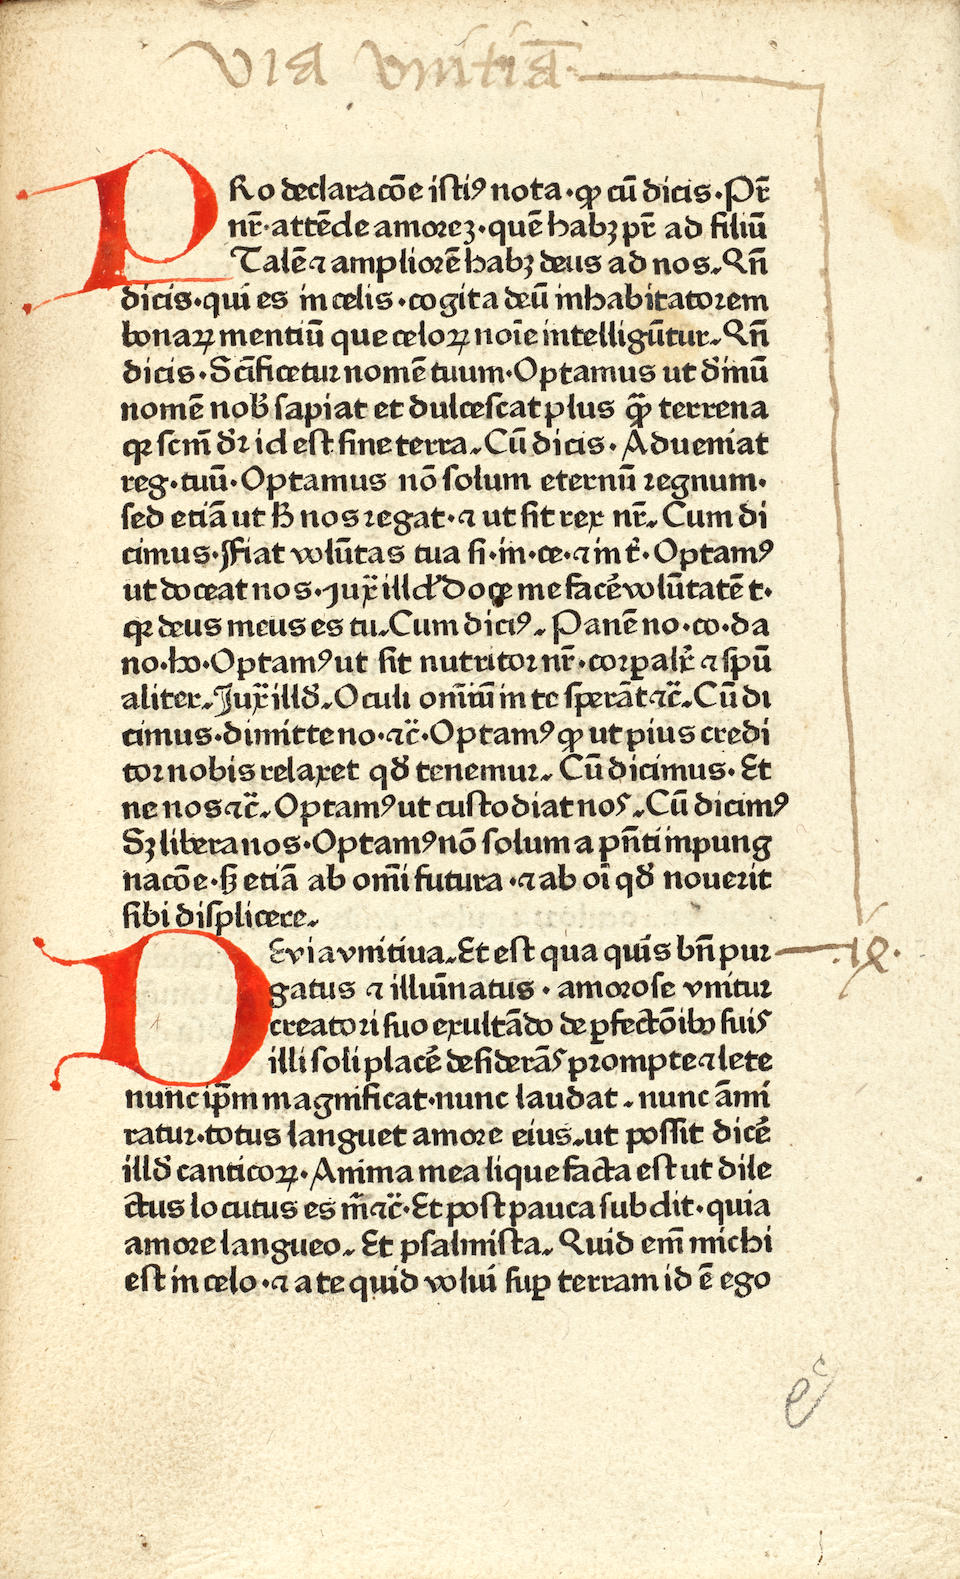 EARLY PRINTING IN COLOGNE. Alphabetum divini amoris. [Cologne: Ulrich Zel, ca 1466/67.]